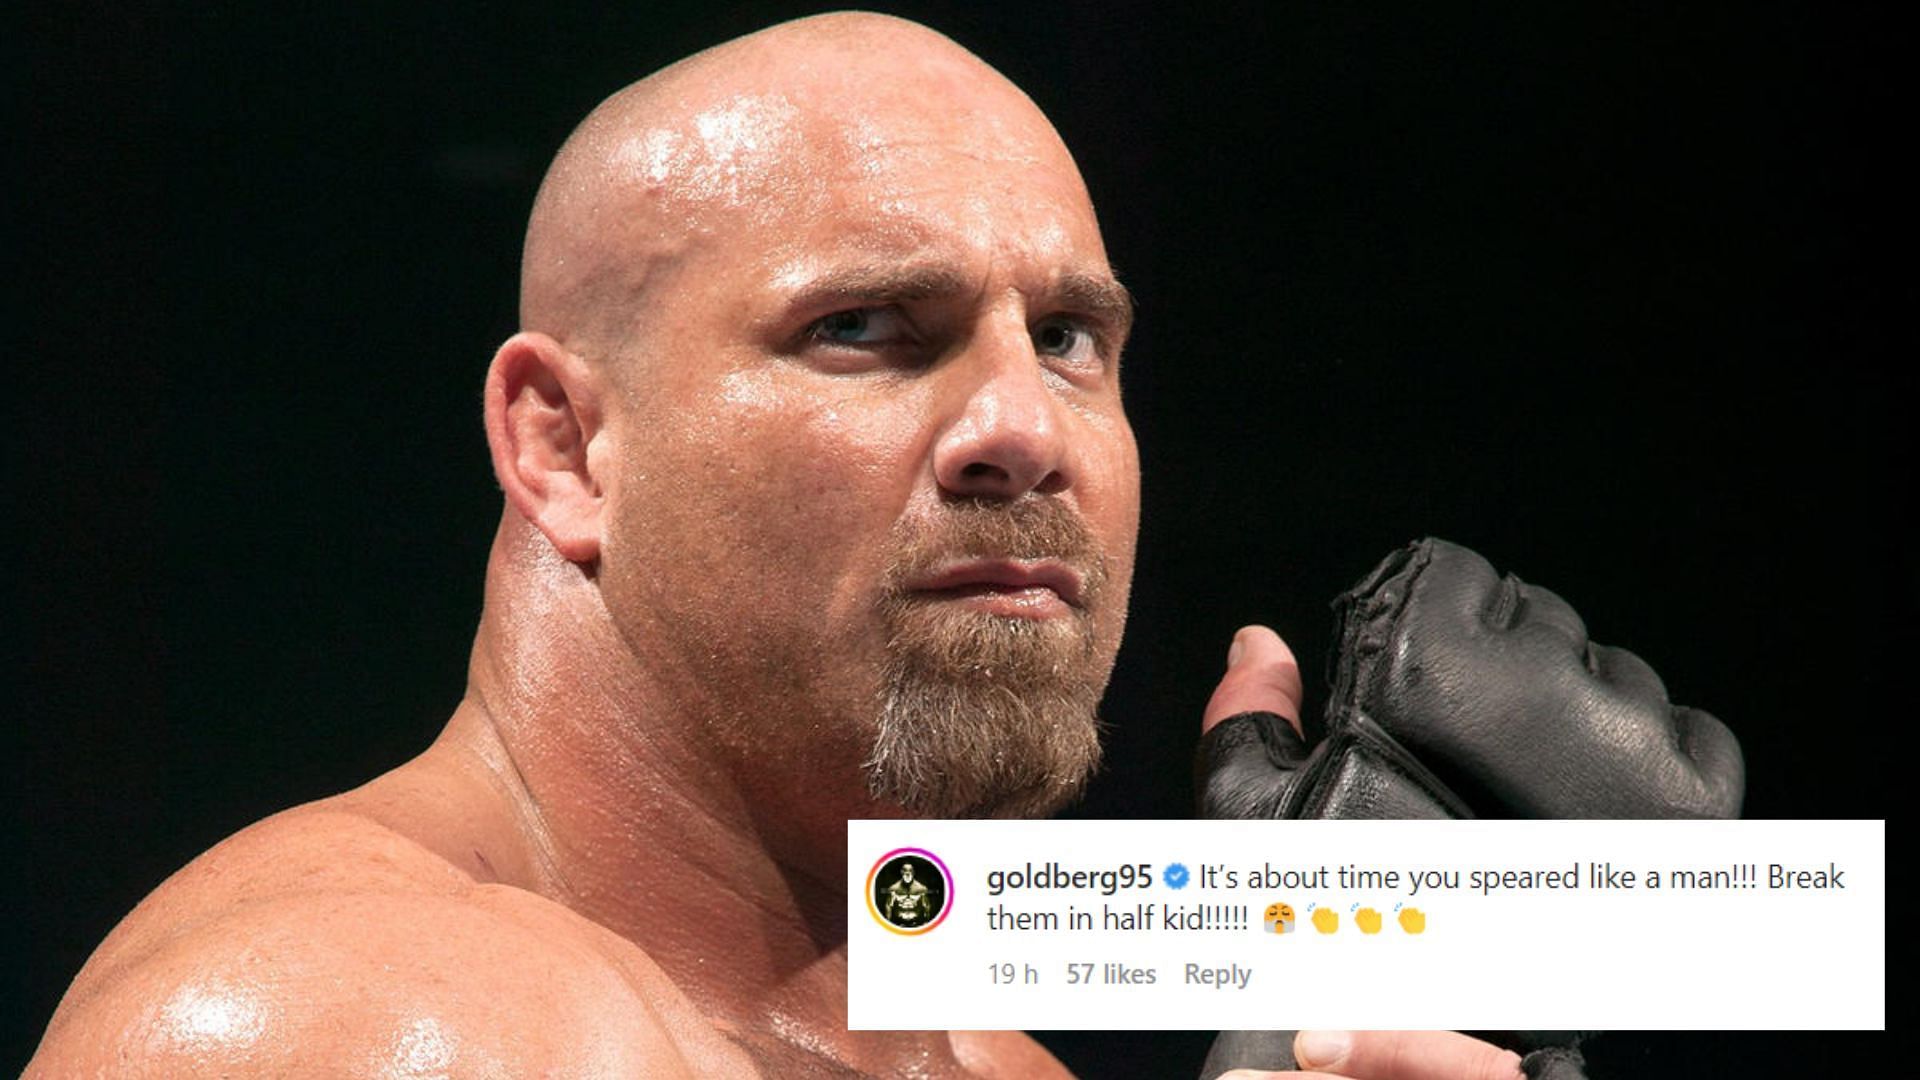 WWE star Goldberg gets tough in helping Texans in need